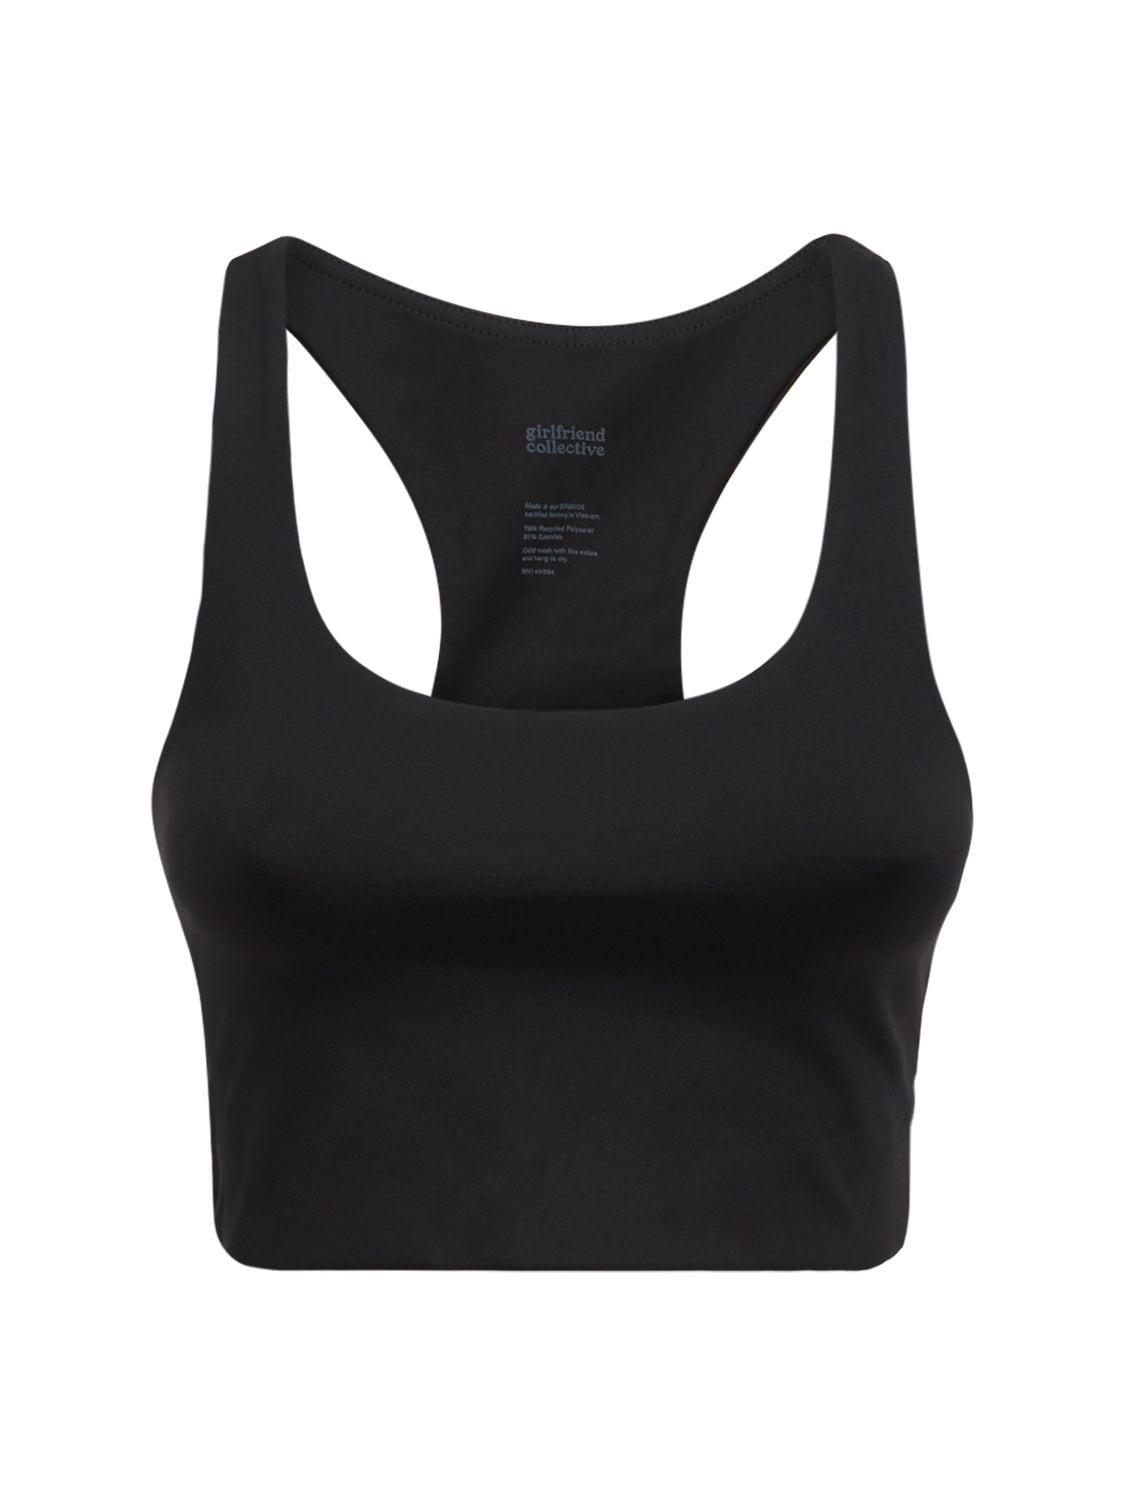 Girlfriend Collective Paloma firm support sports bra